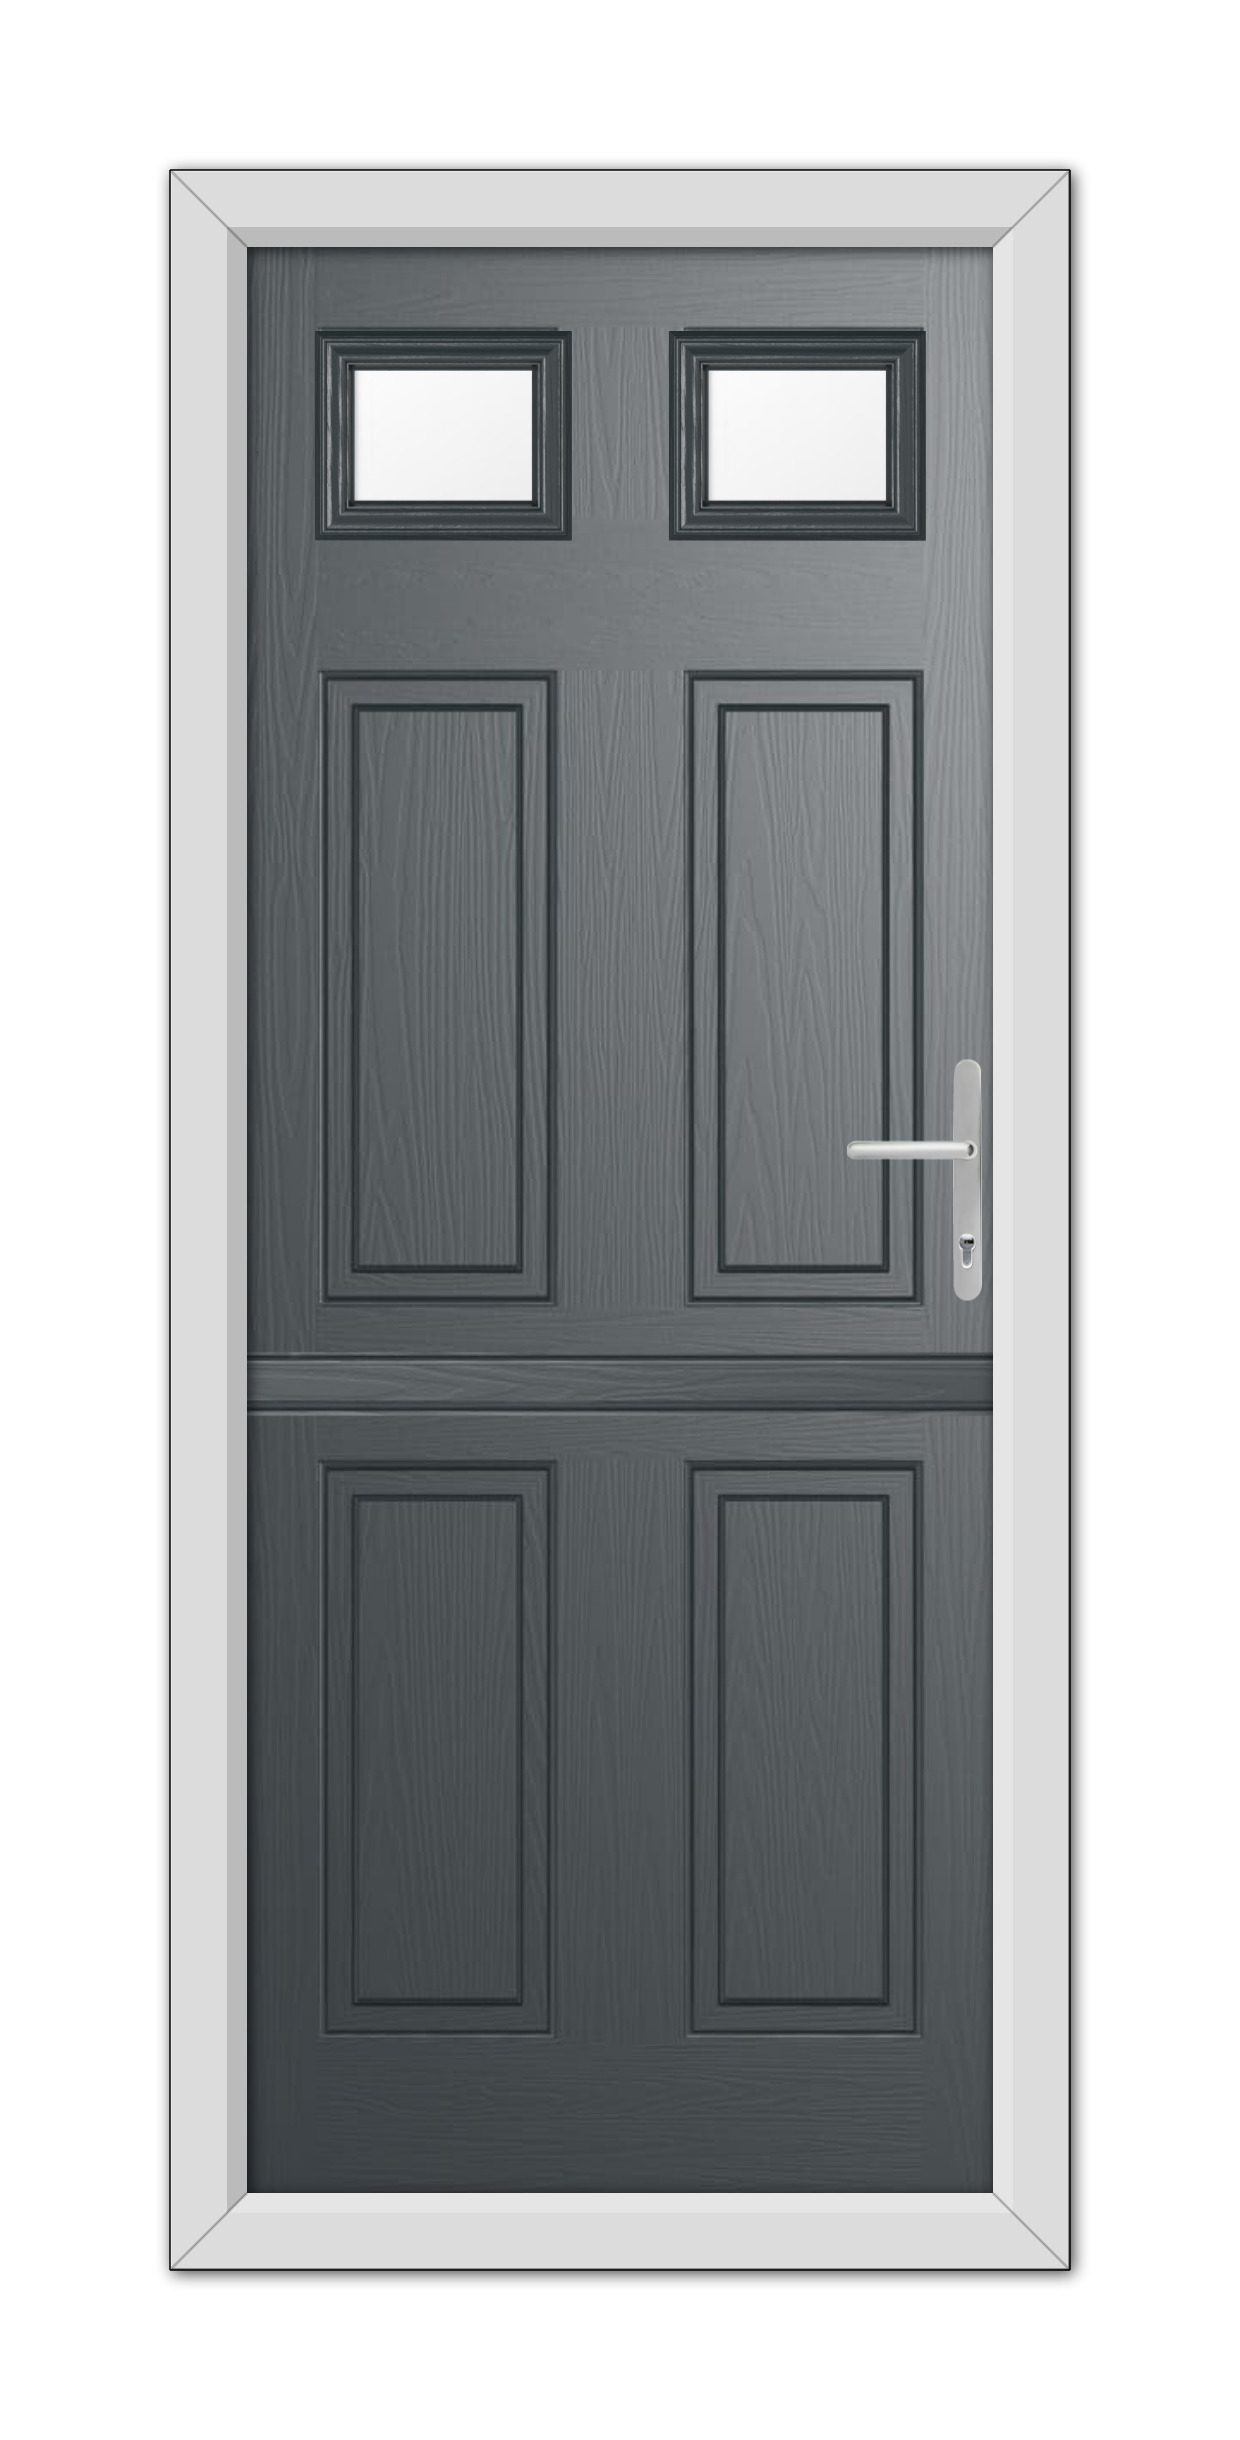 A modern Anthracite Grey Middleton Glazed 2 Stable Composite Door 48mm Timber Core with four panels and three rectangular windows at the top, framed in white and equipped with a silver handle.